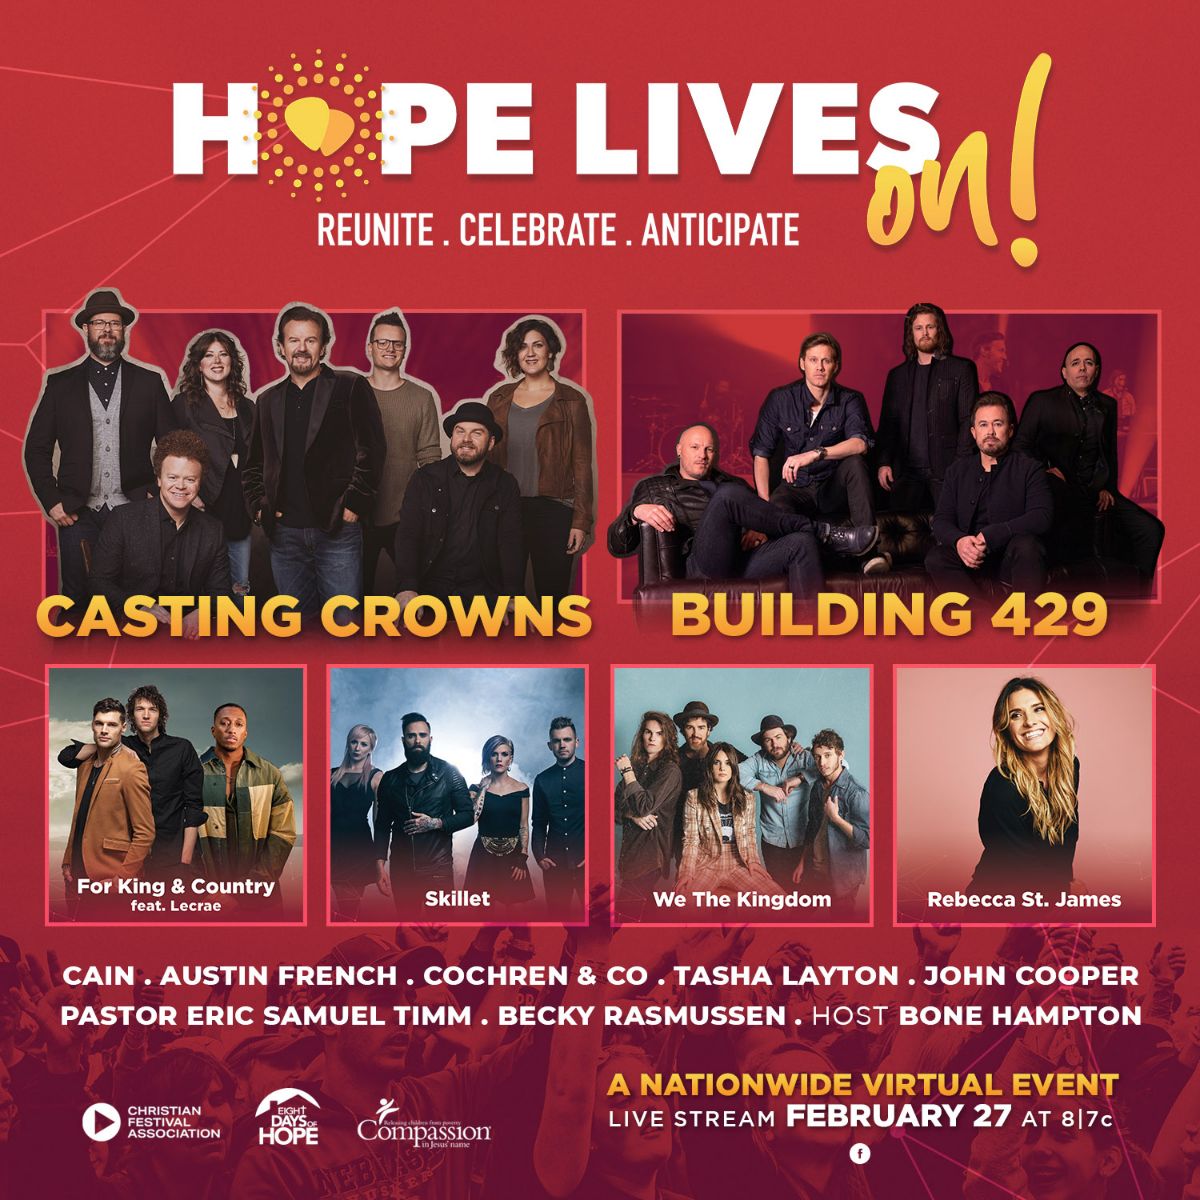 The Christian Festival Association to Present the 'Hope Lives On' Virtual Festival Today